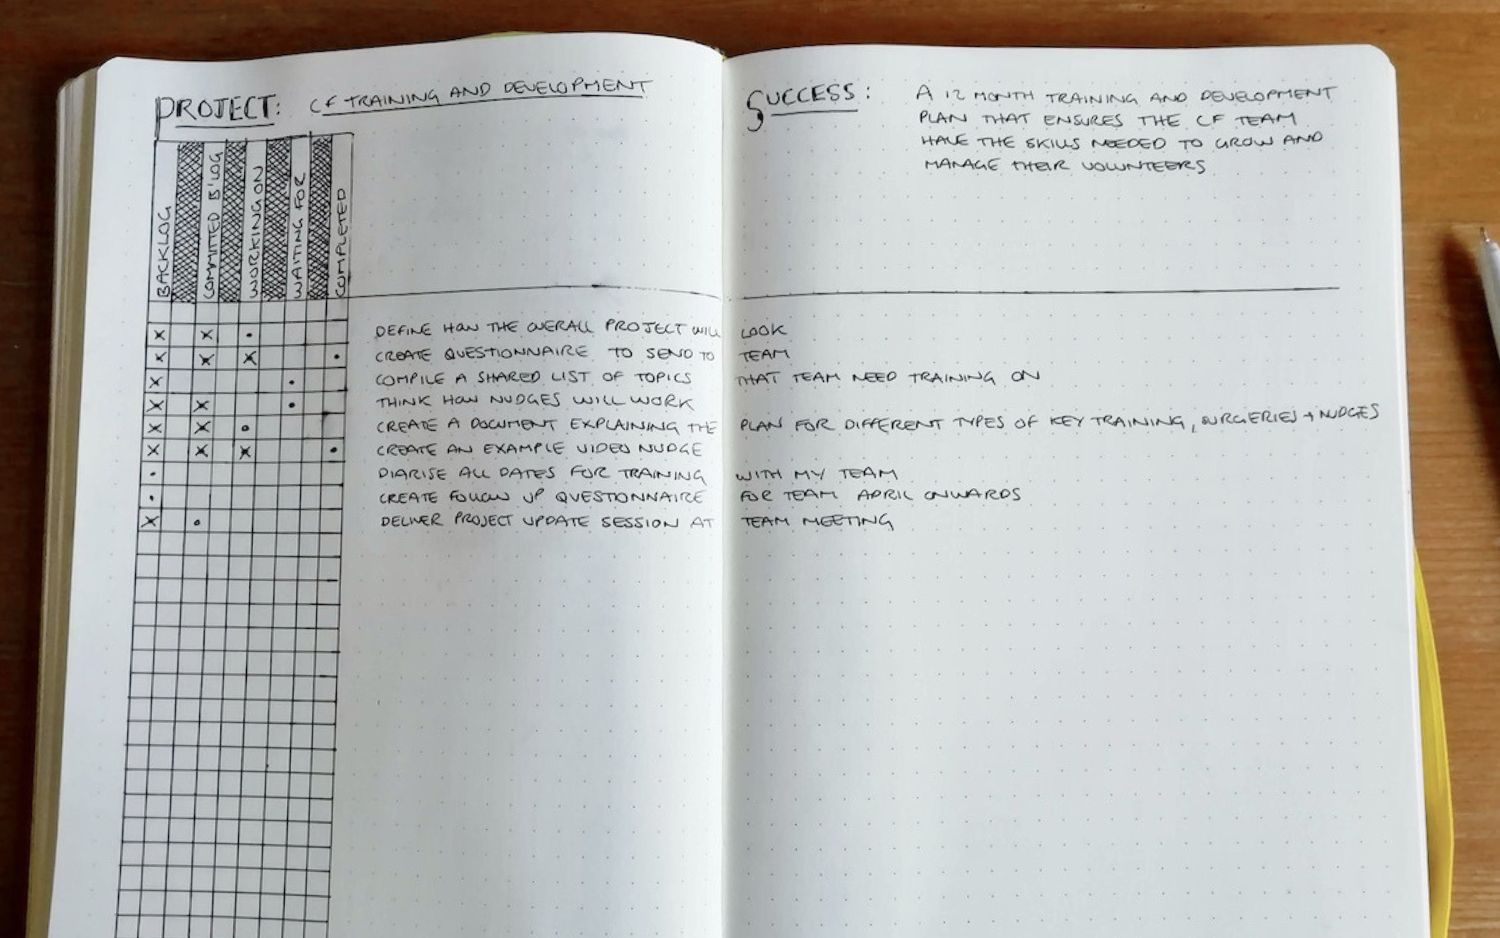 The Commonplace Book as a Thinker's Journal - Bullet Journal